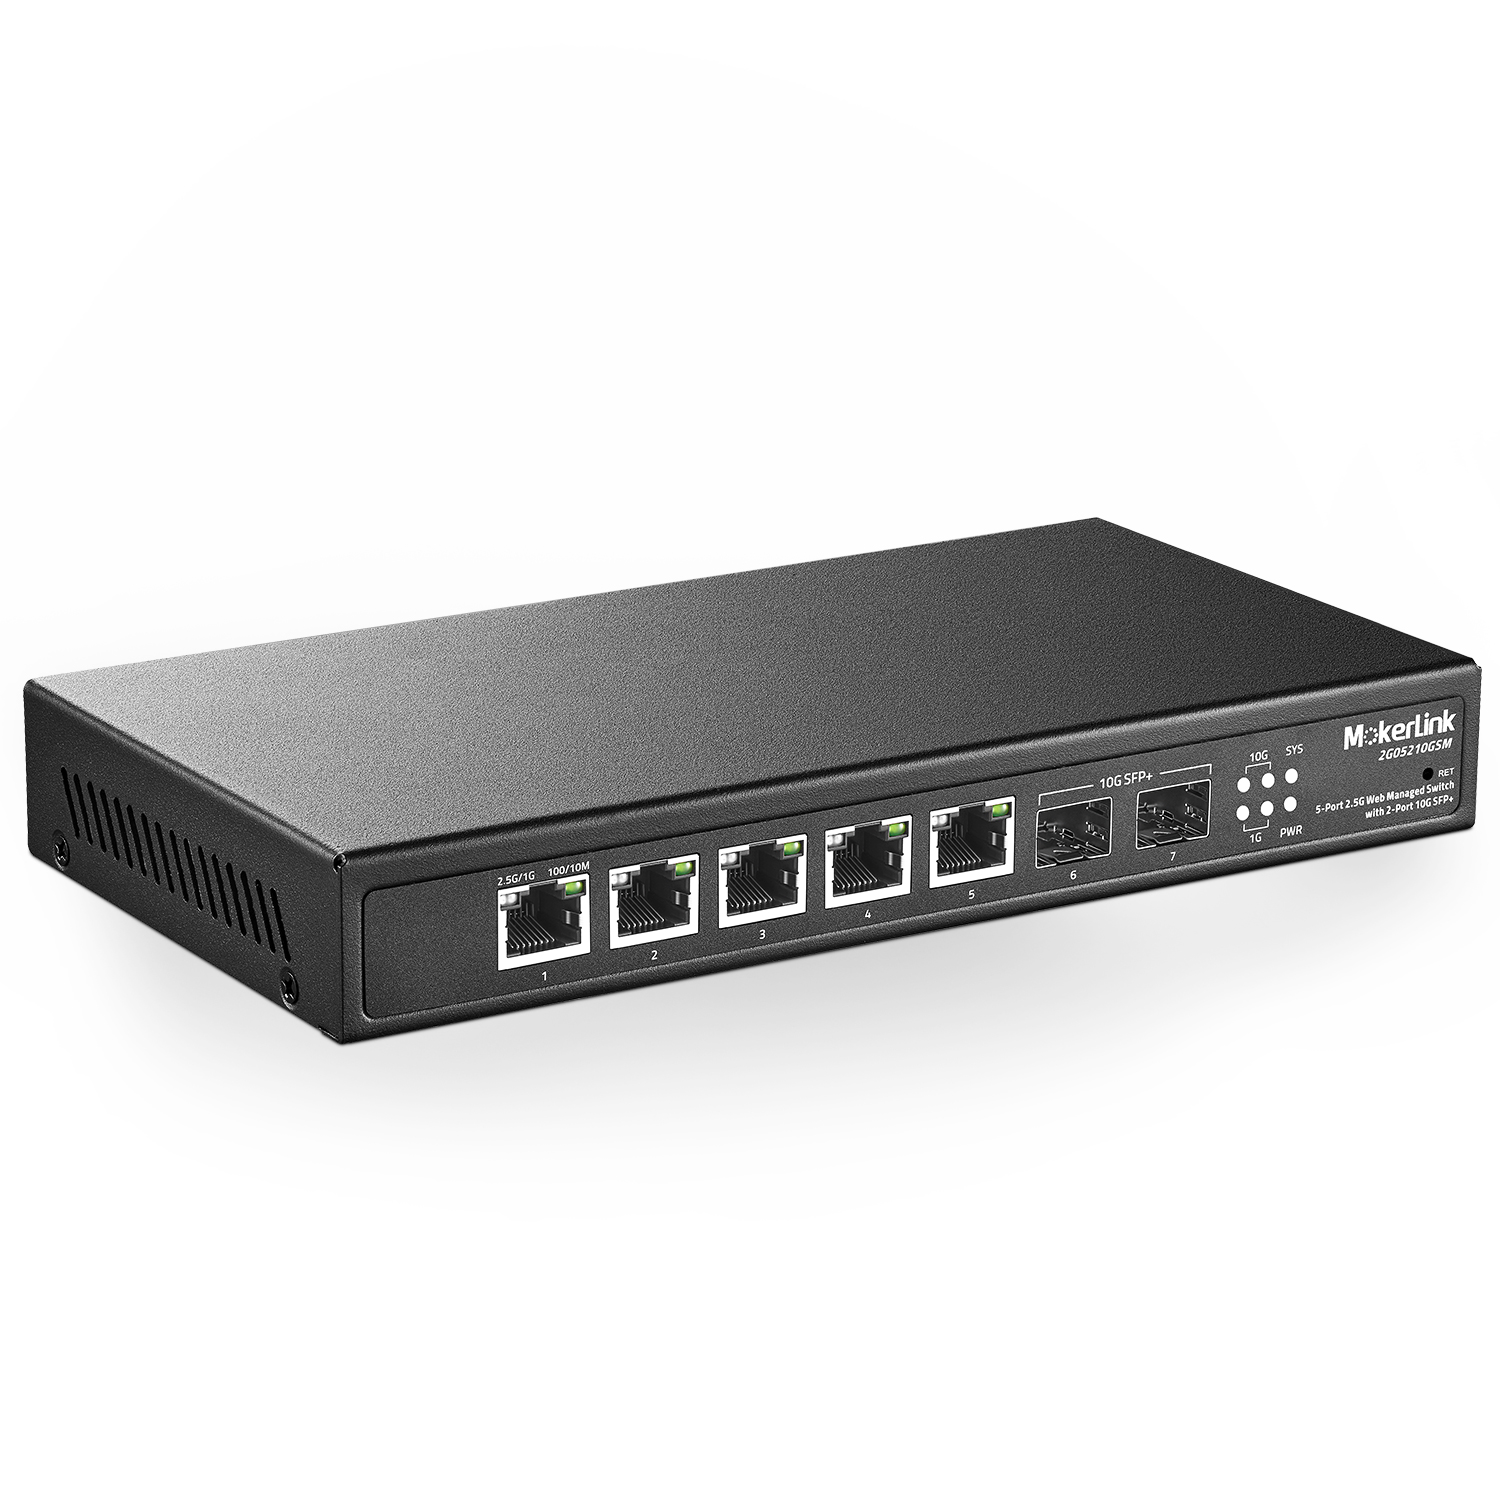 2.5G Ethernet Switch, Unmanaged 9-Port POE Switch, 8 x 2.5G Base-T & 1 x  10G SFP, Multi-Speed Network Switch, Compatible with Gigabit & 10Gb